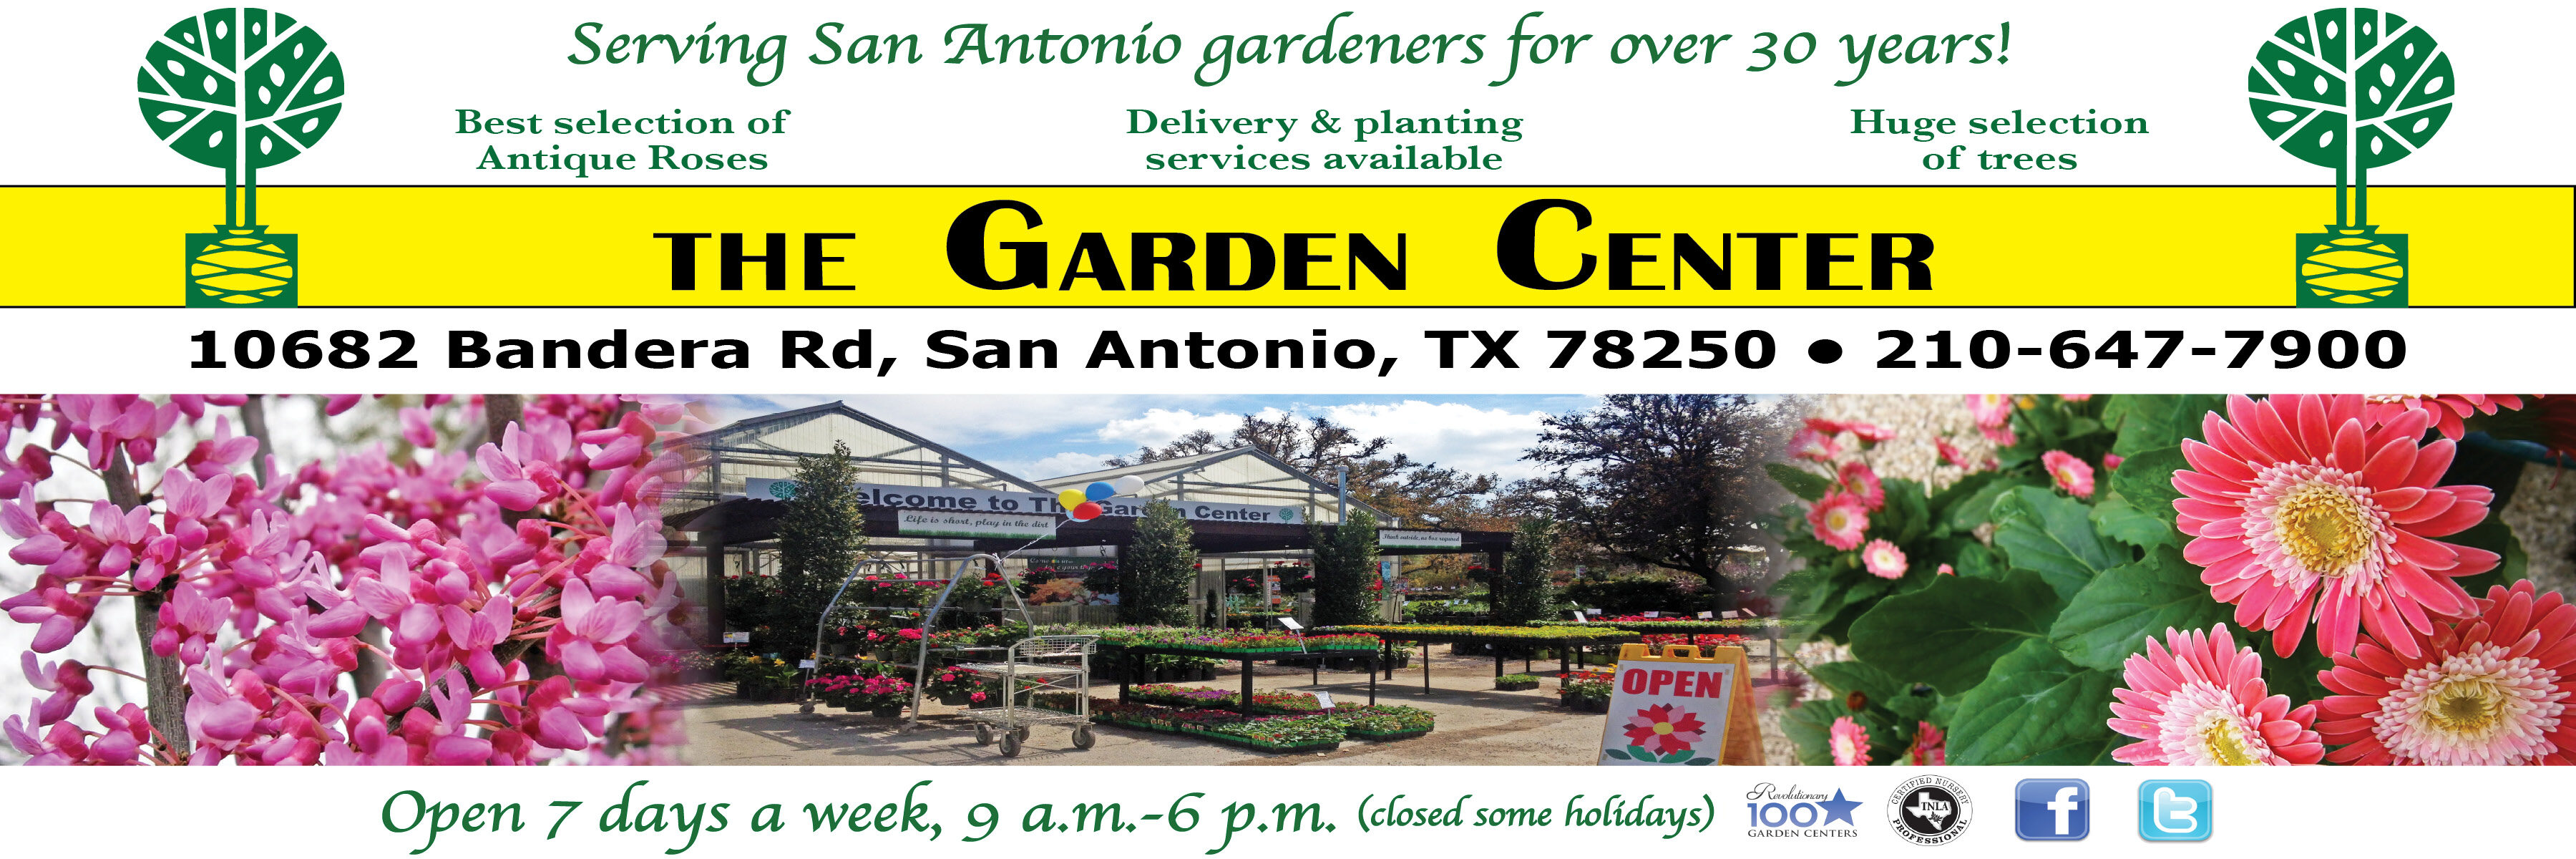 San Antonio Texas Local Gardening Resources And Experts